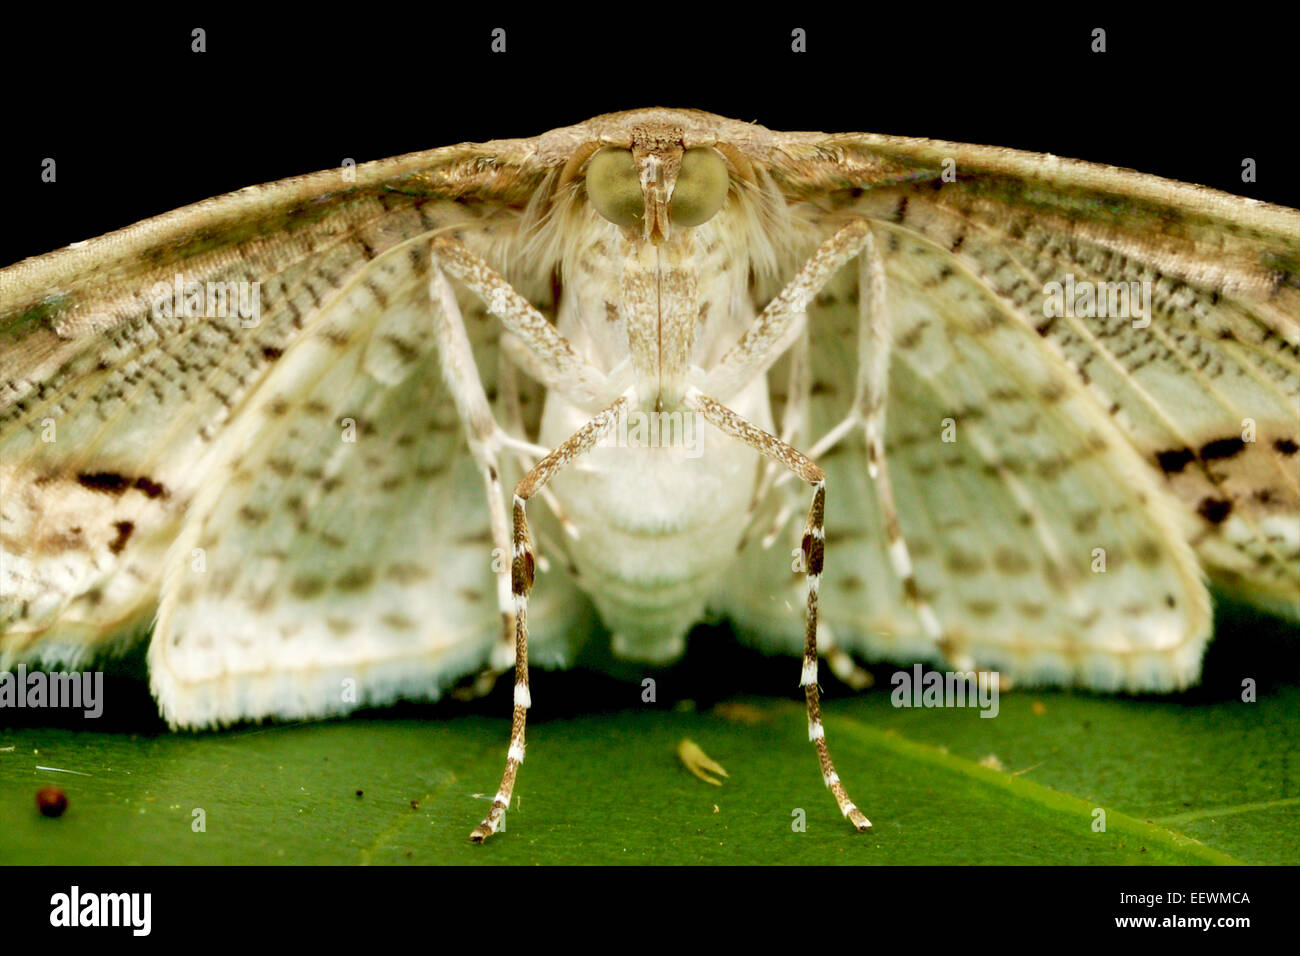 The Crambidae are the grass moth family of Lepidoptera (butterflies and moths). Stock Photo